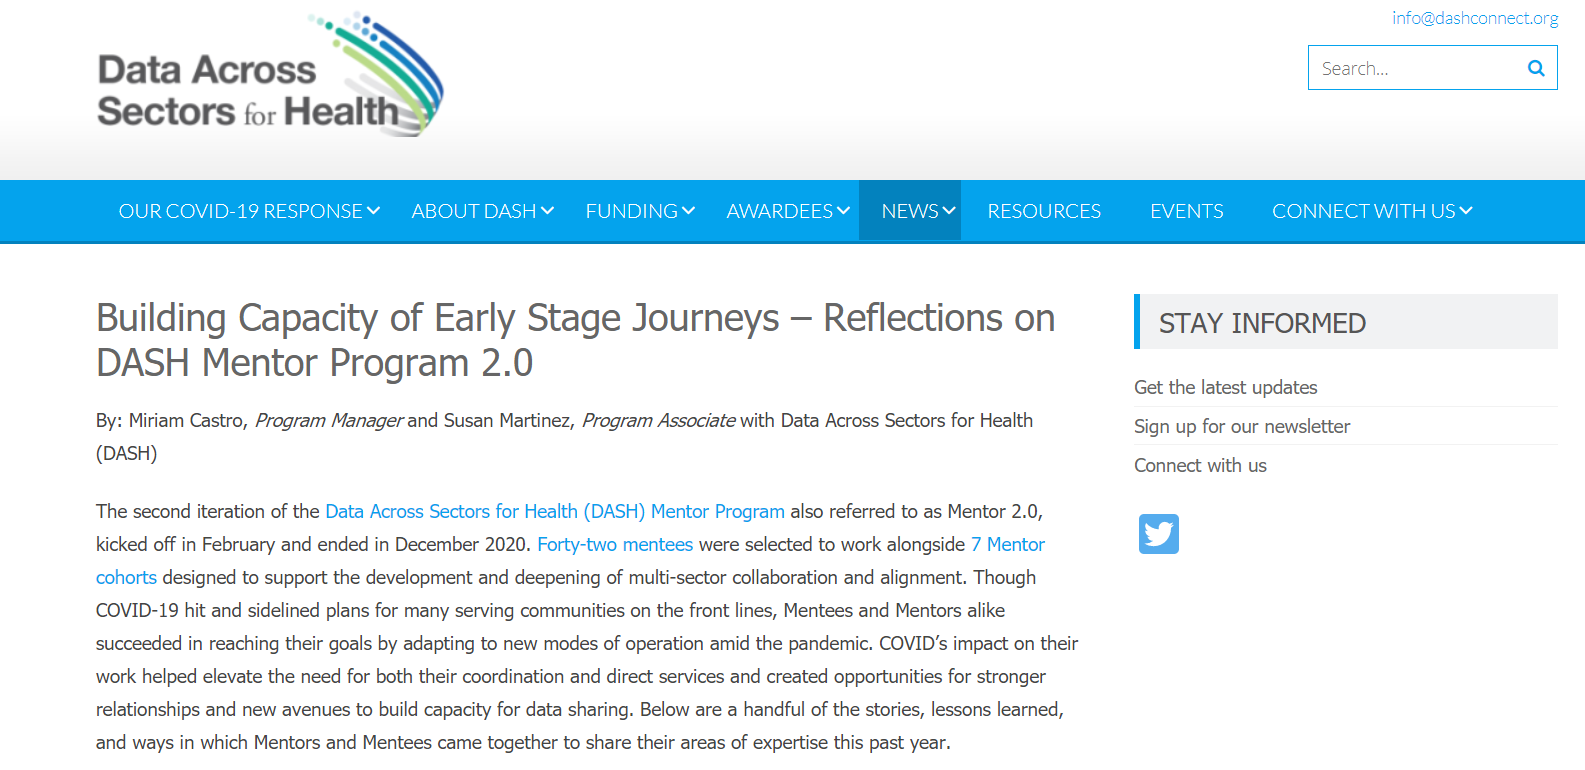 Building Capacity of Early Stage Journeys – Reflections on DASH Mentor Program 2.0